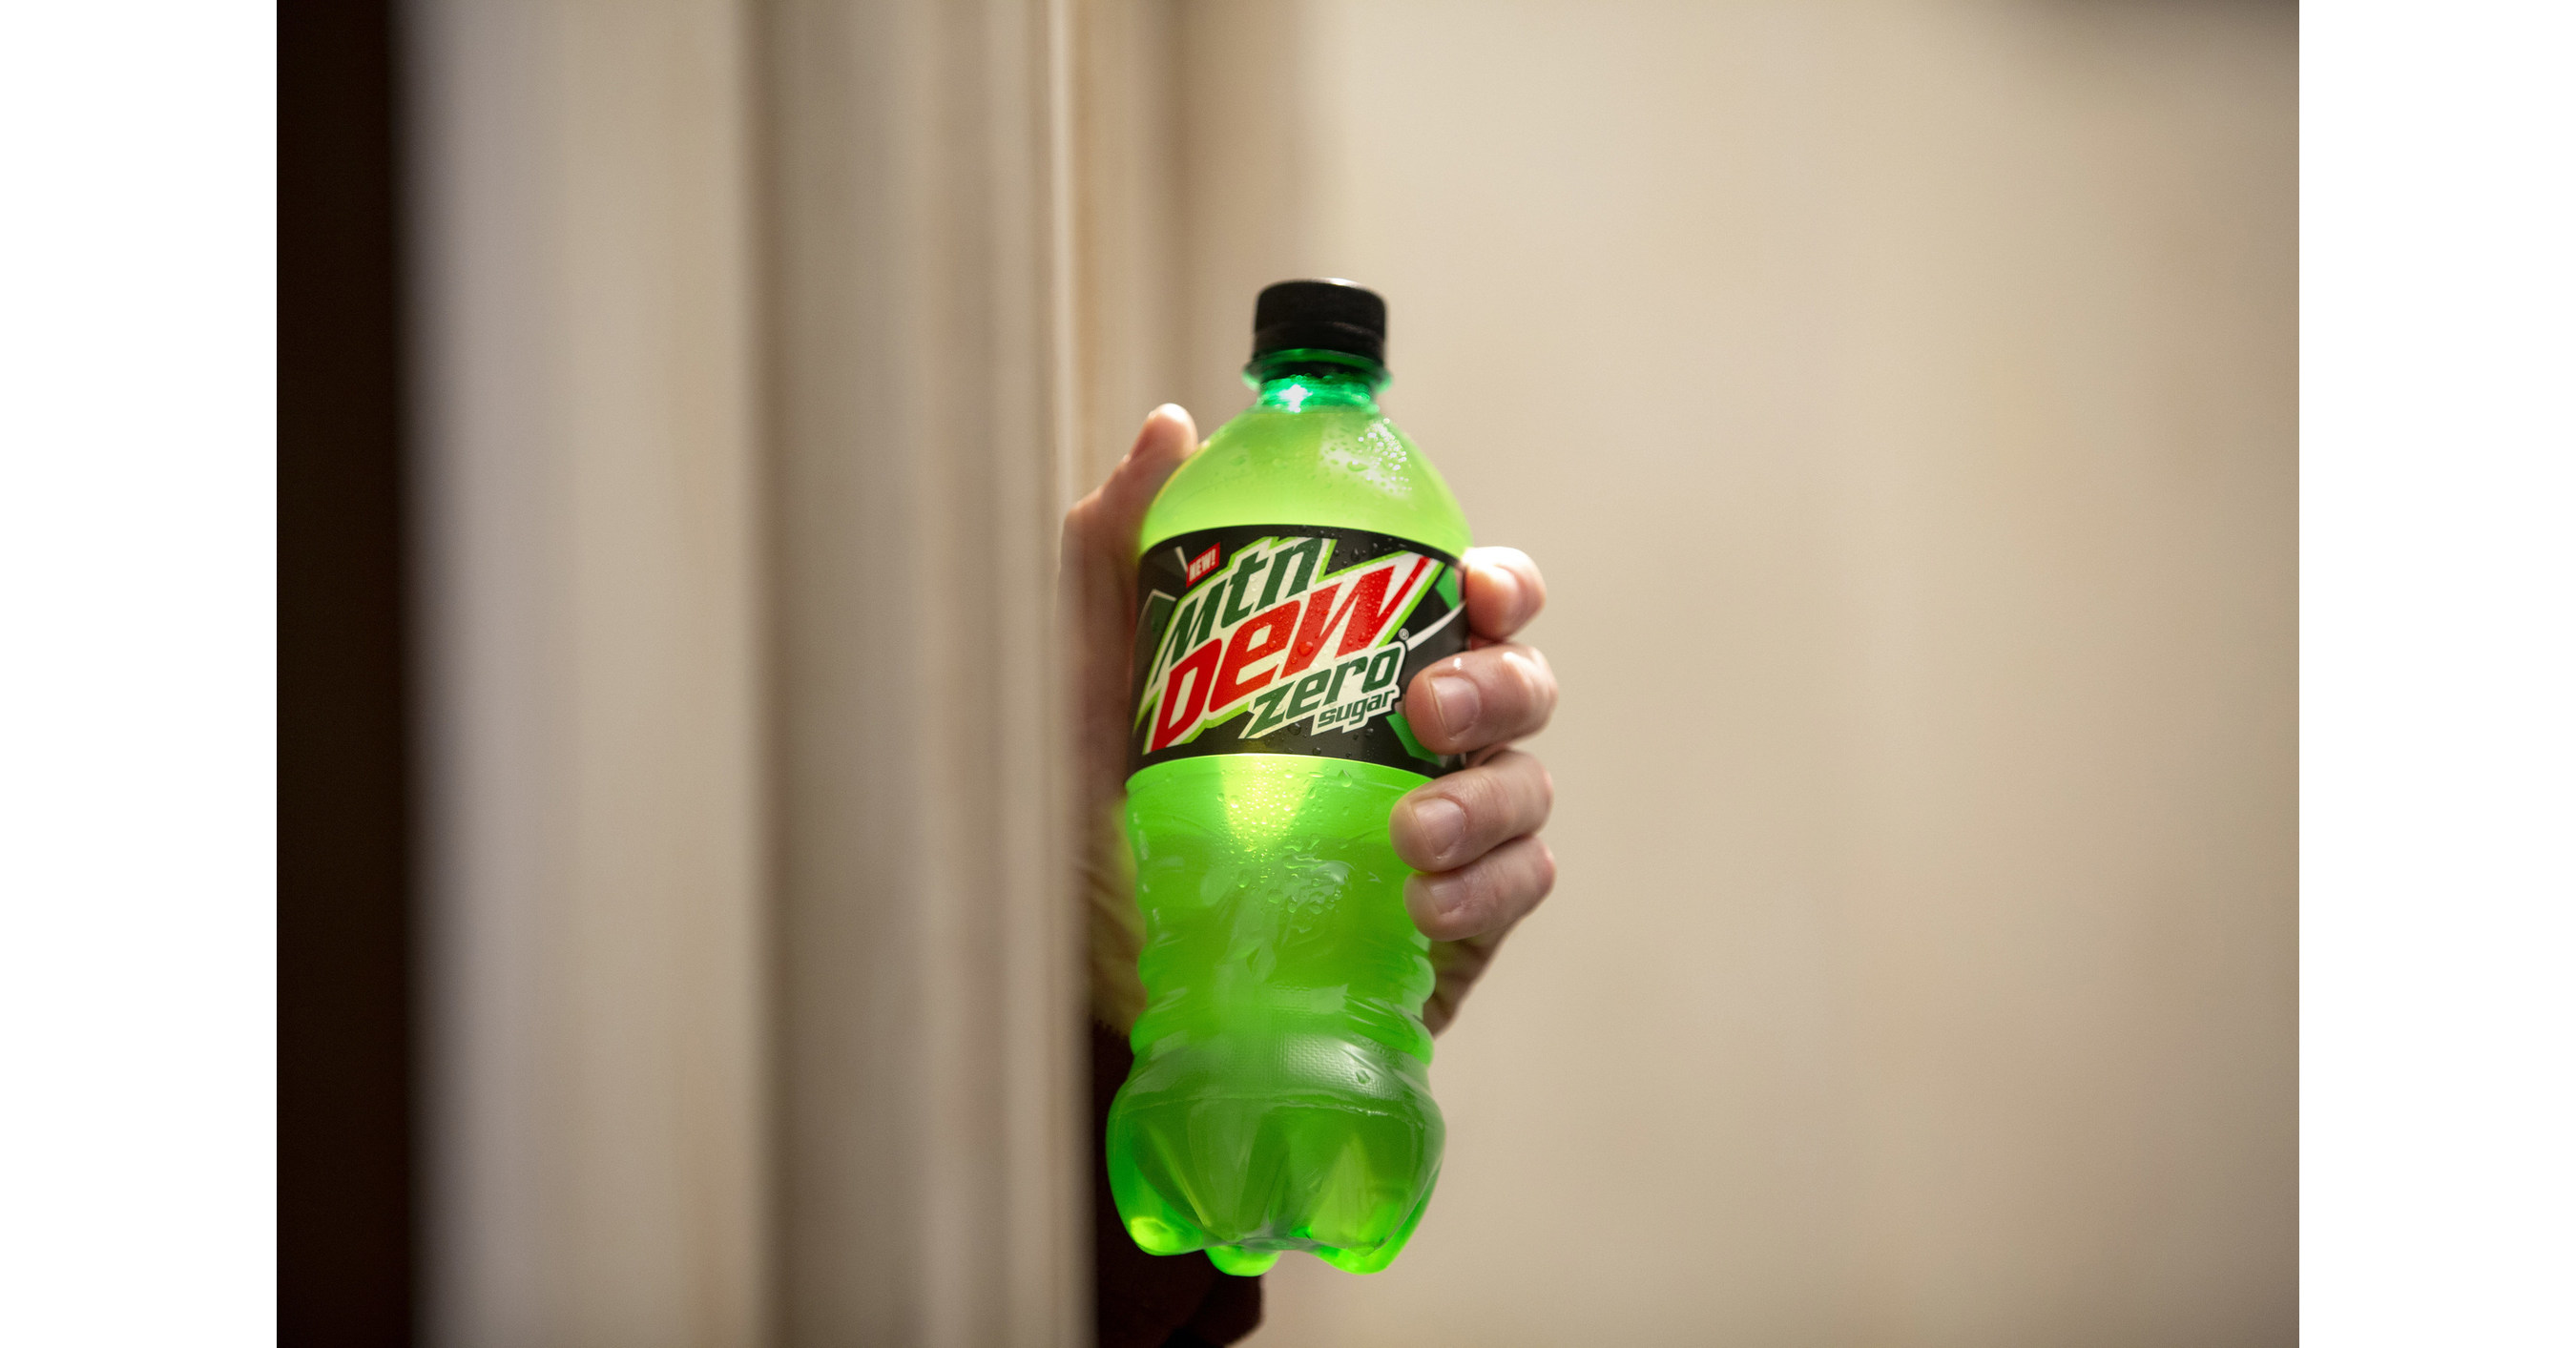 Mtn Dew Proves That Mtn Dew Zero Sugar Is As Good As The Original With Super Bowl Ad That Reimagines Classic Movie The Shining